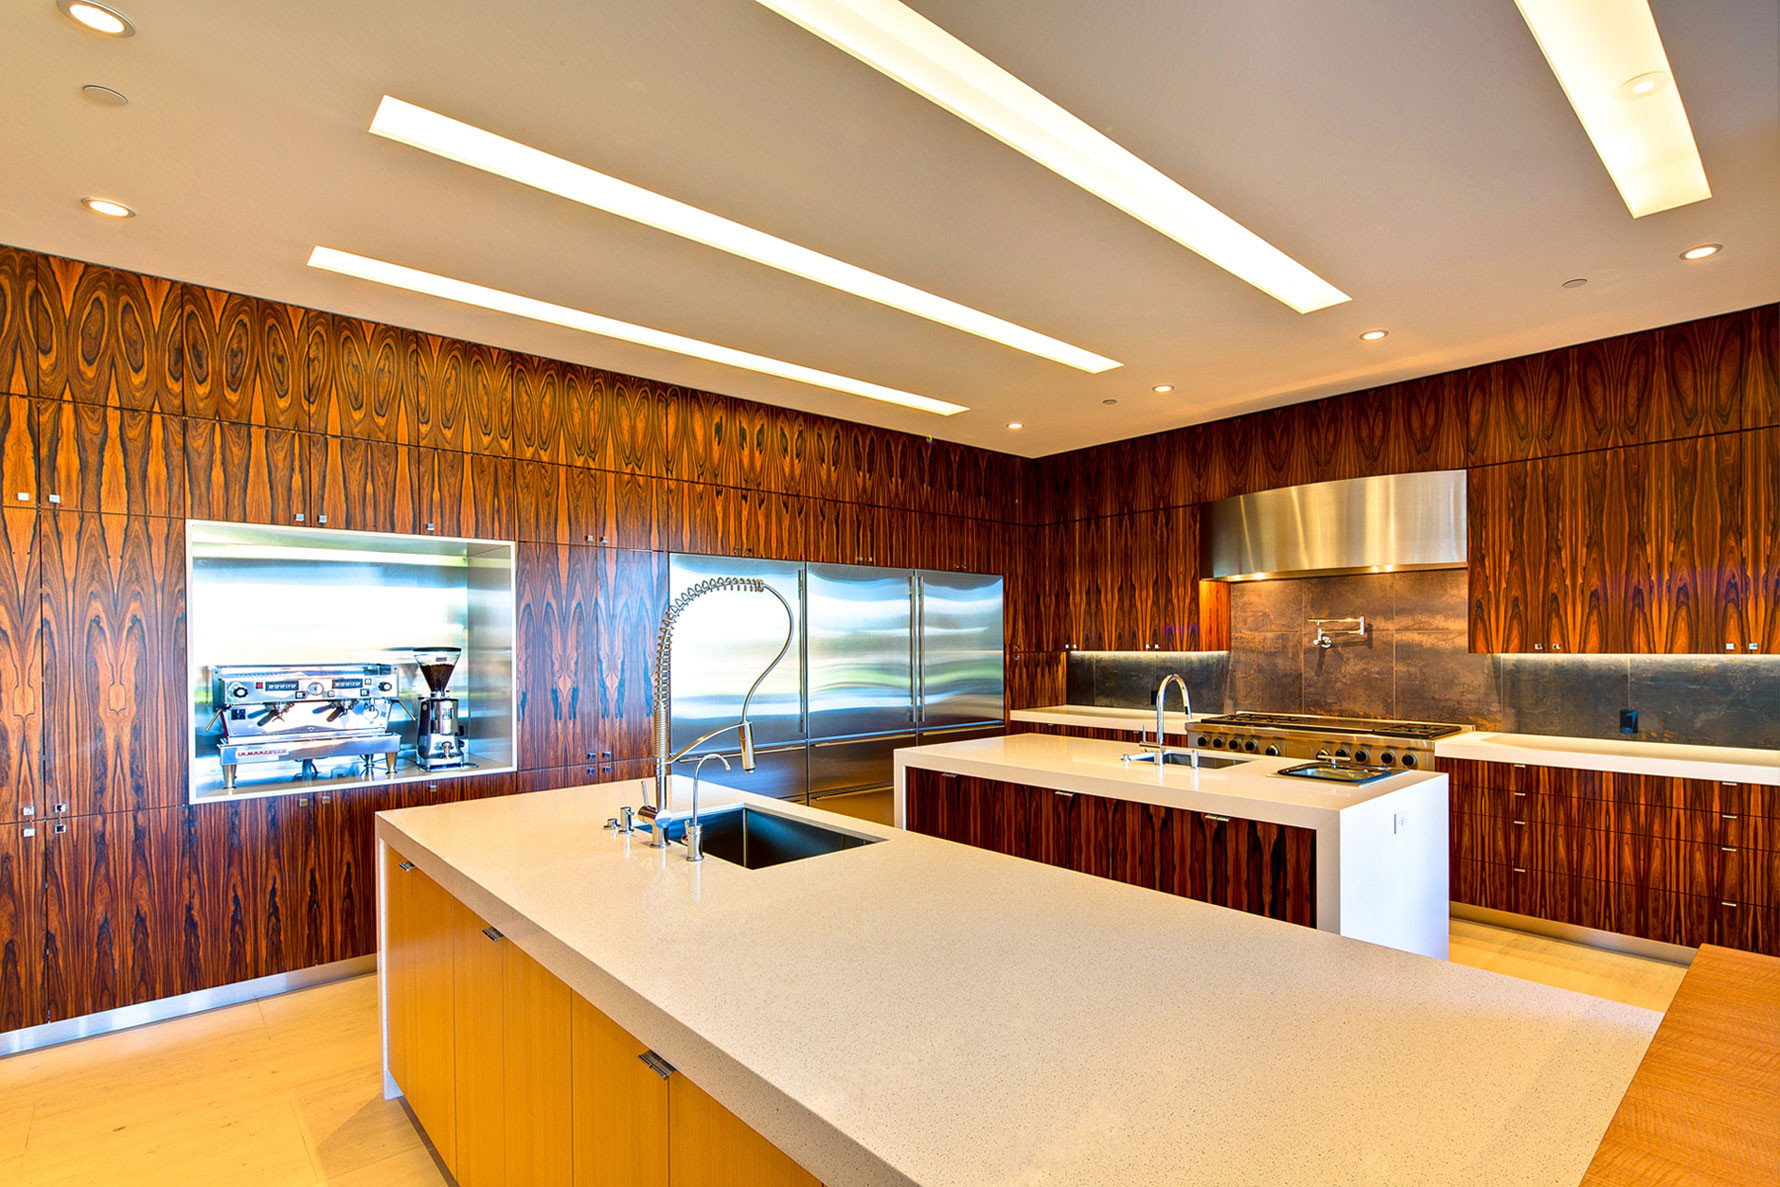 Kitchen Wall Coverings
 Wood Wall Covering Ideas – HomesFeed